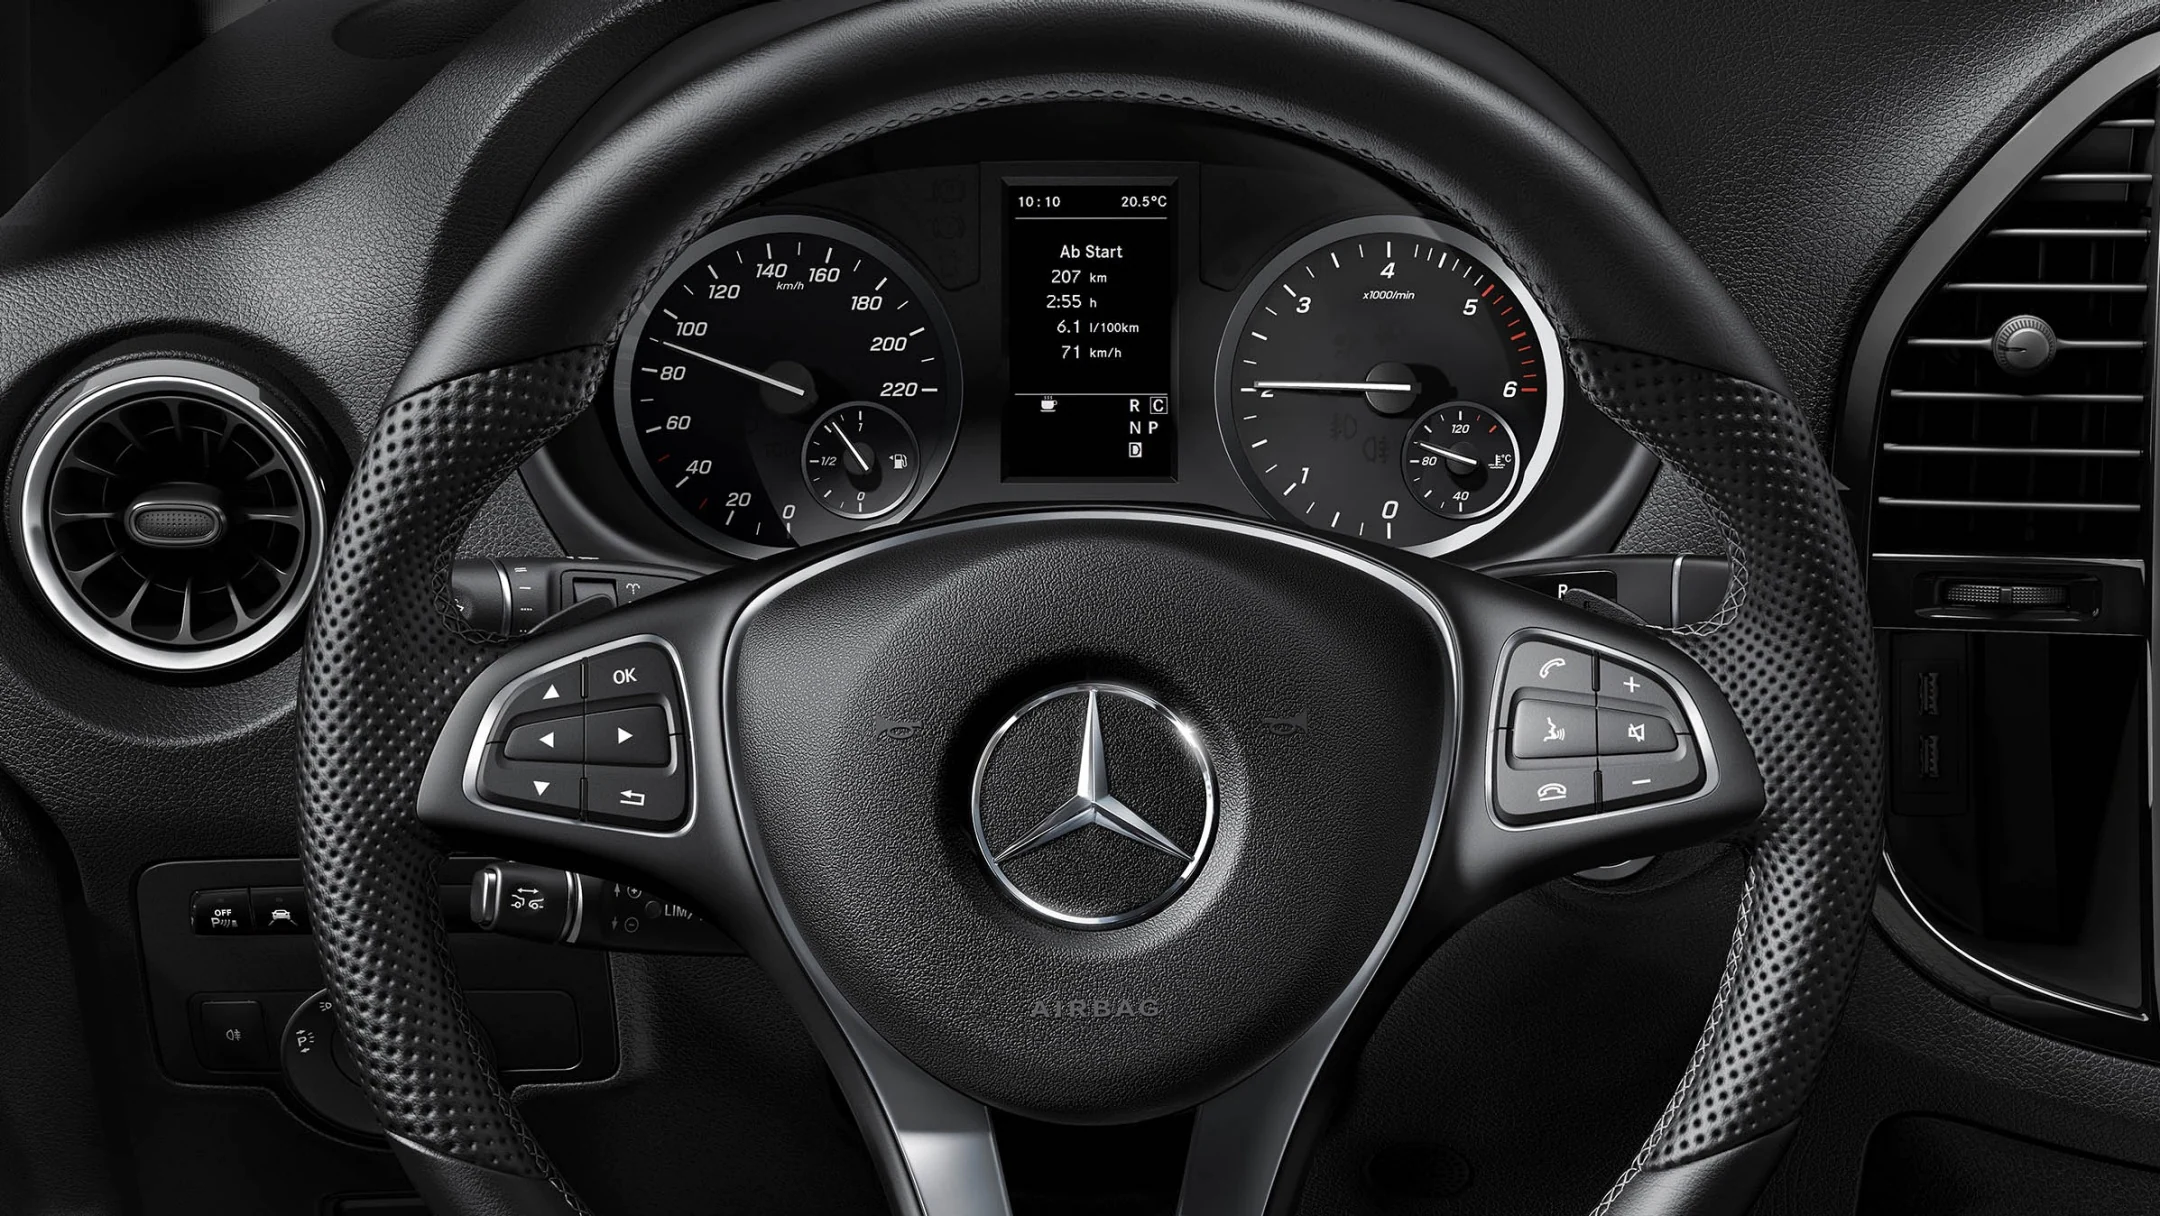 Steering wheel cover featuring stylish nappa leather